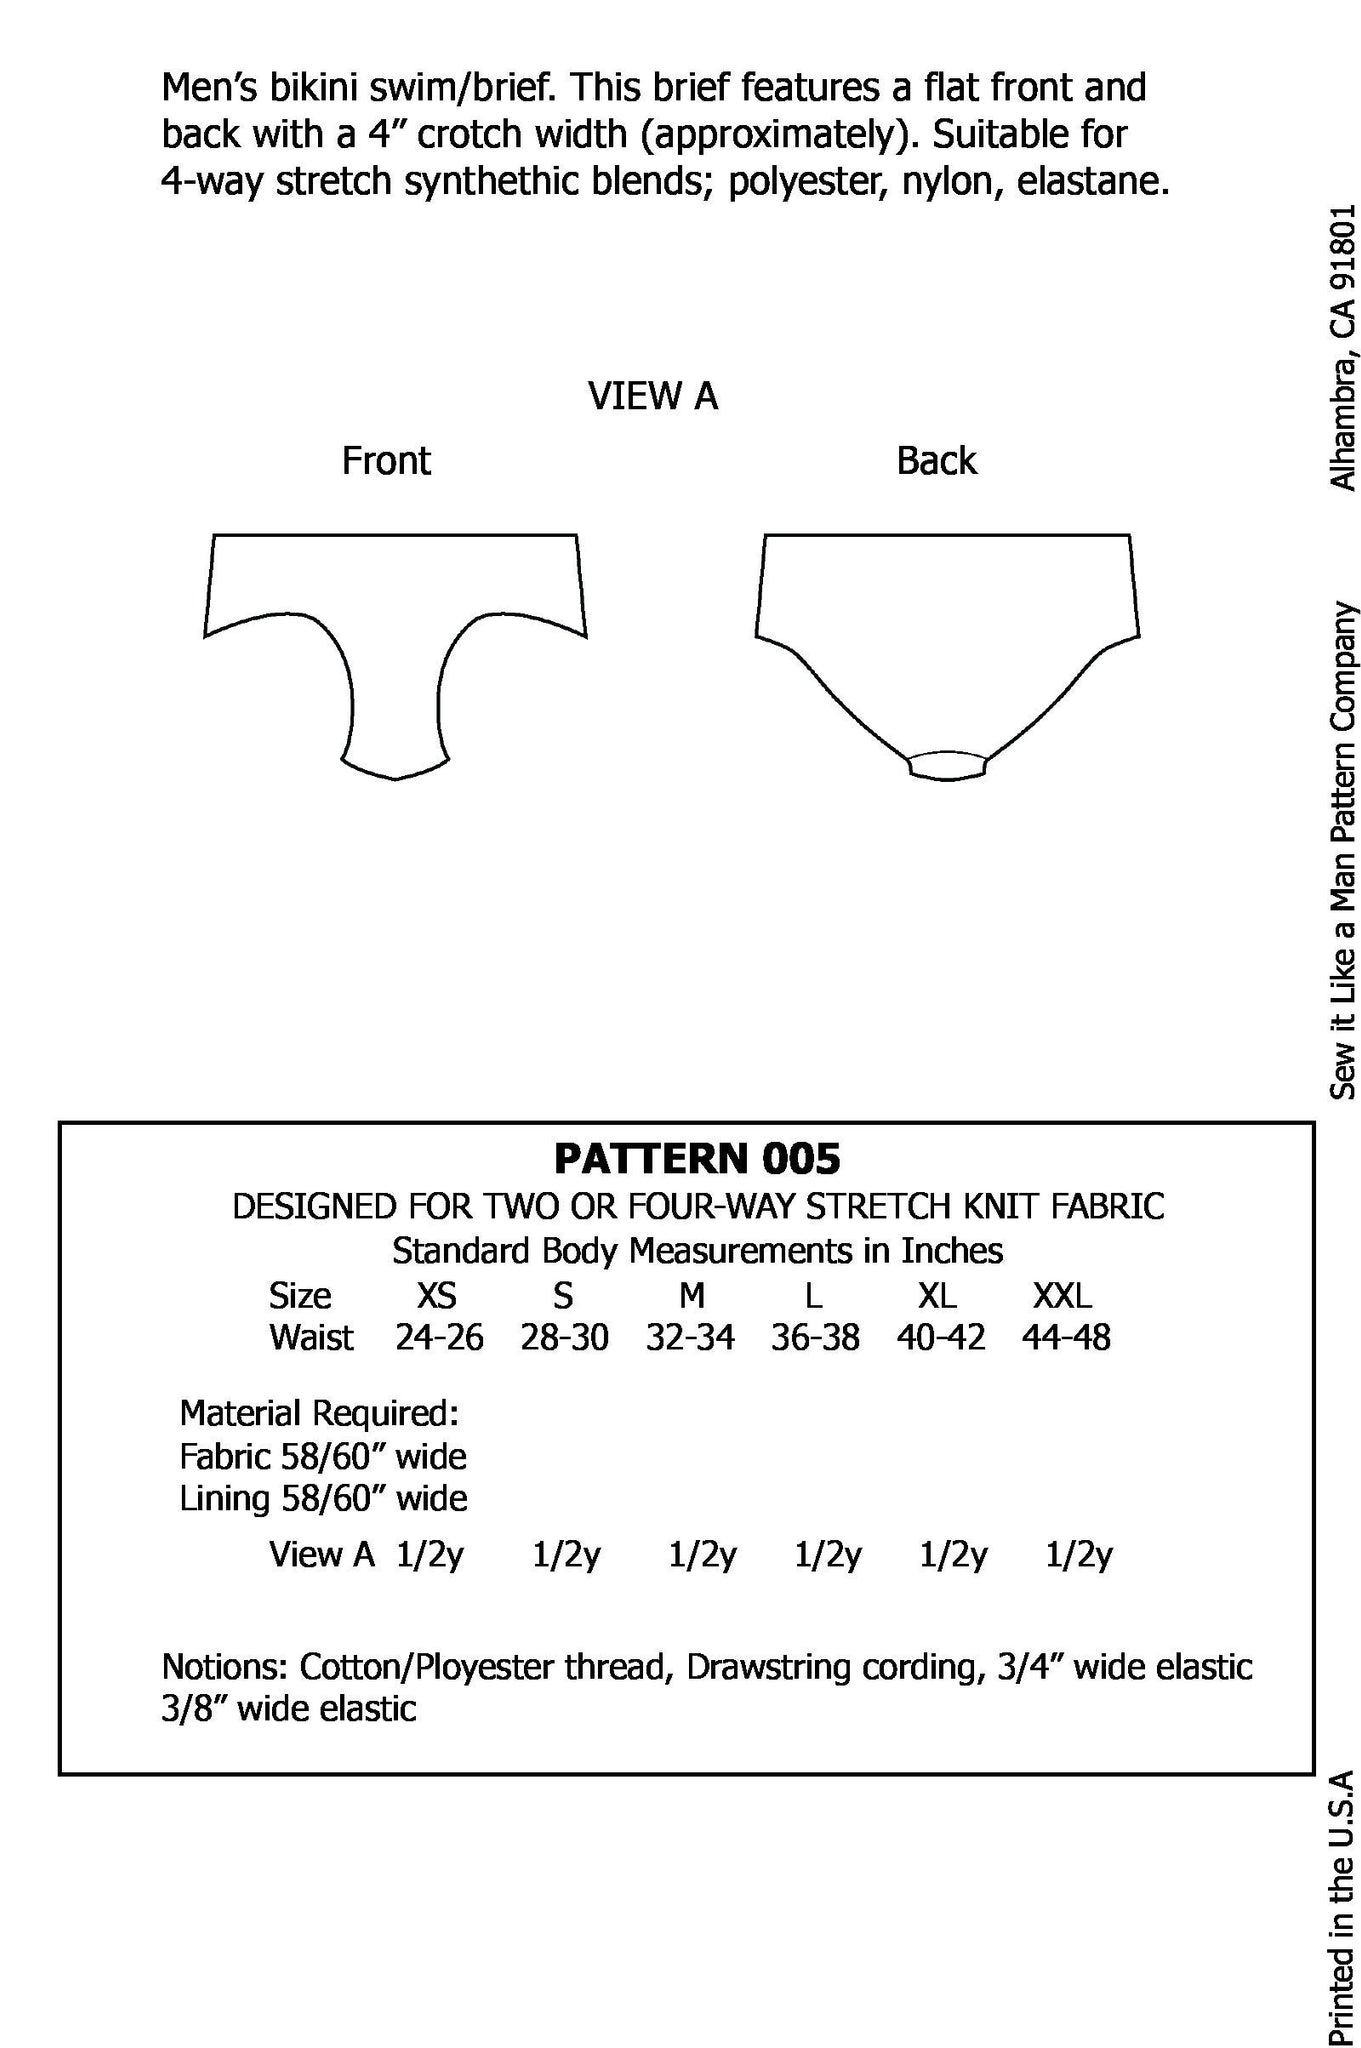 iThinksew - Patterns and More - Underwear Men PDF Sewing Pattern - Mr.  Perfecto